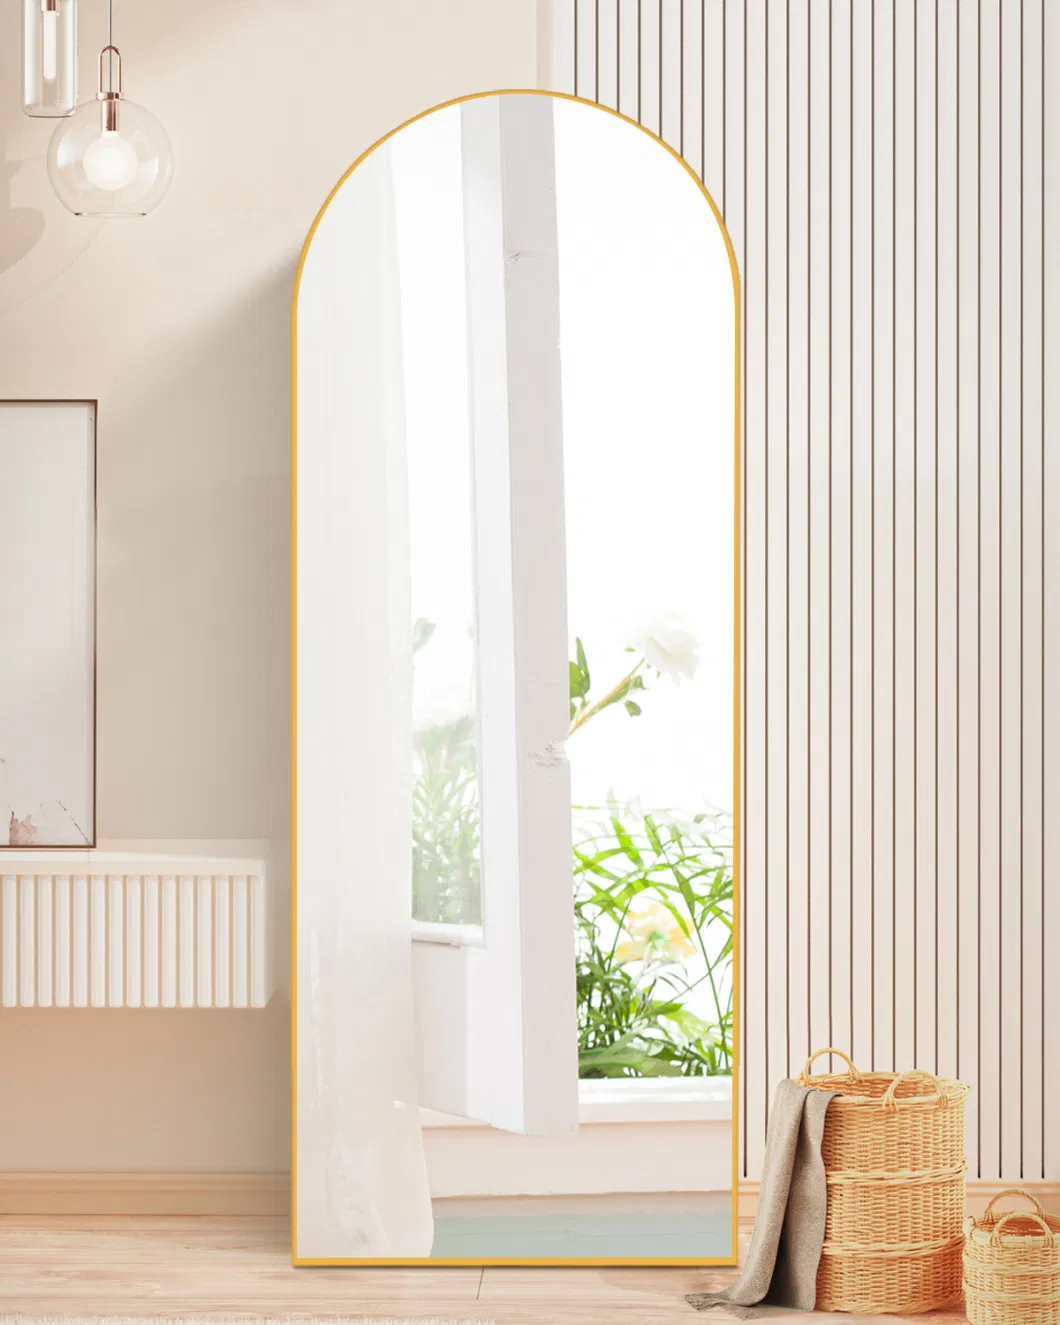 Arched Big Full Length Free Standing Wall Mounted Long Dressing Floor Body Mirror